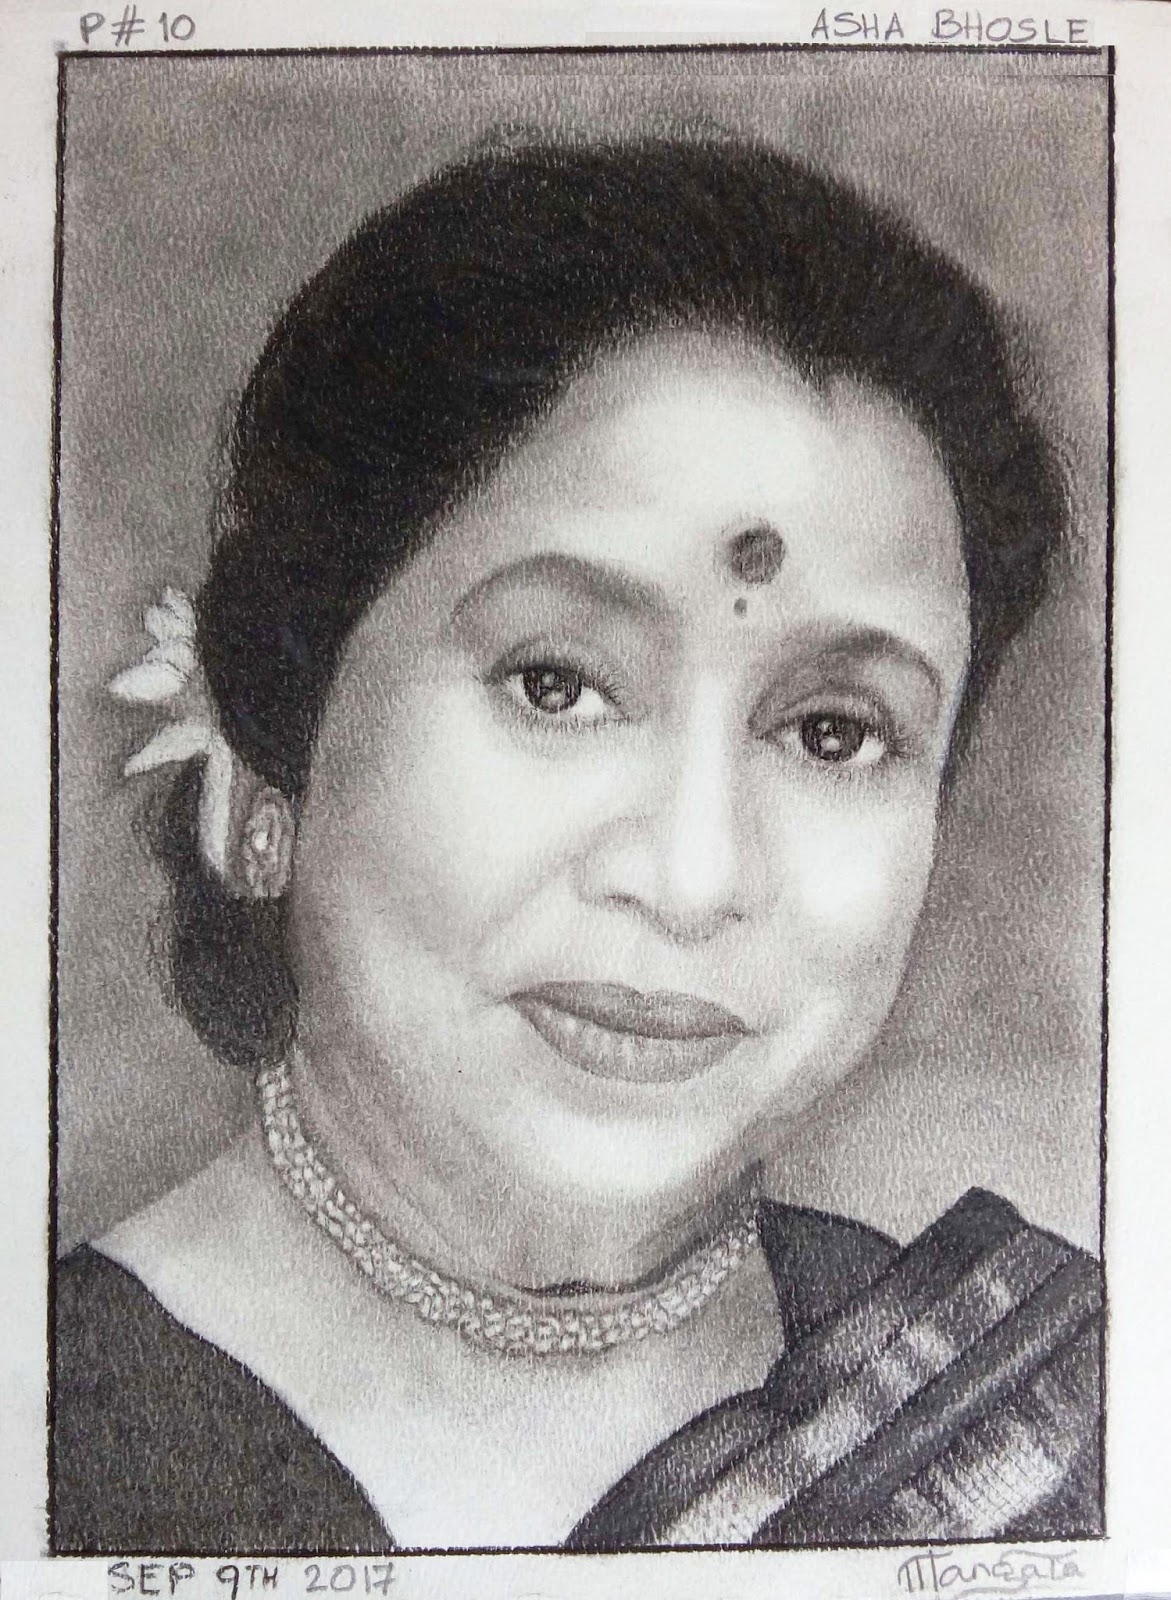 Aritra paul on Instagram Drawing ashabhosle  art draw  pencildrawing pencilandpaper ashabhosle asha  artwork artworld  artlover singerdrawing dailydrawing indianartist newwork songlover  artlover Full video available on my youtube 